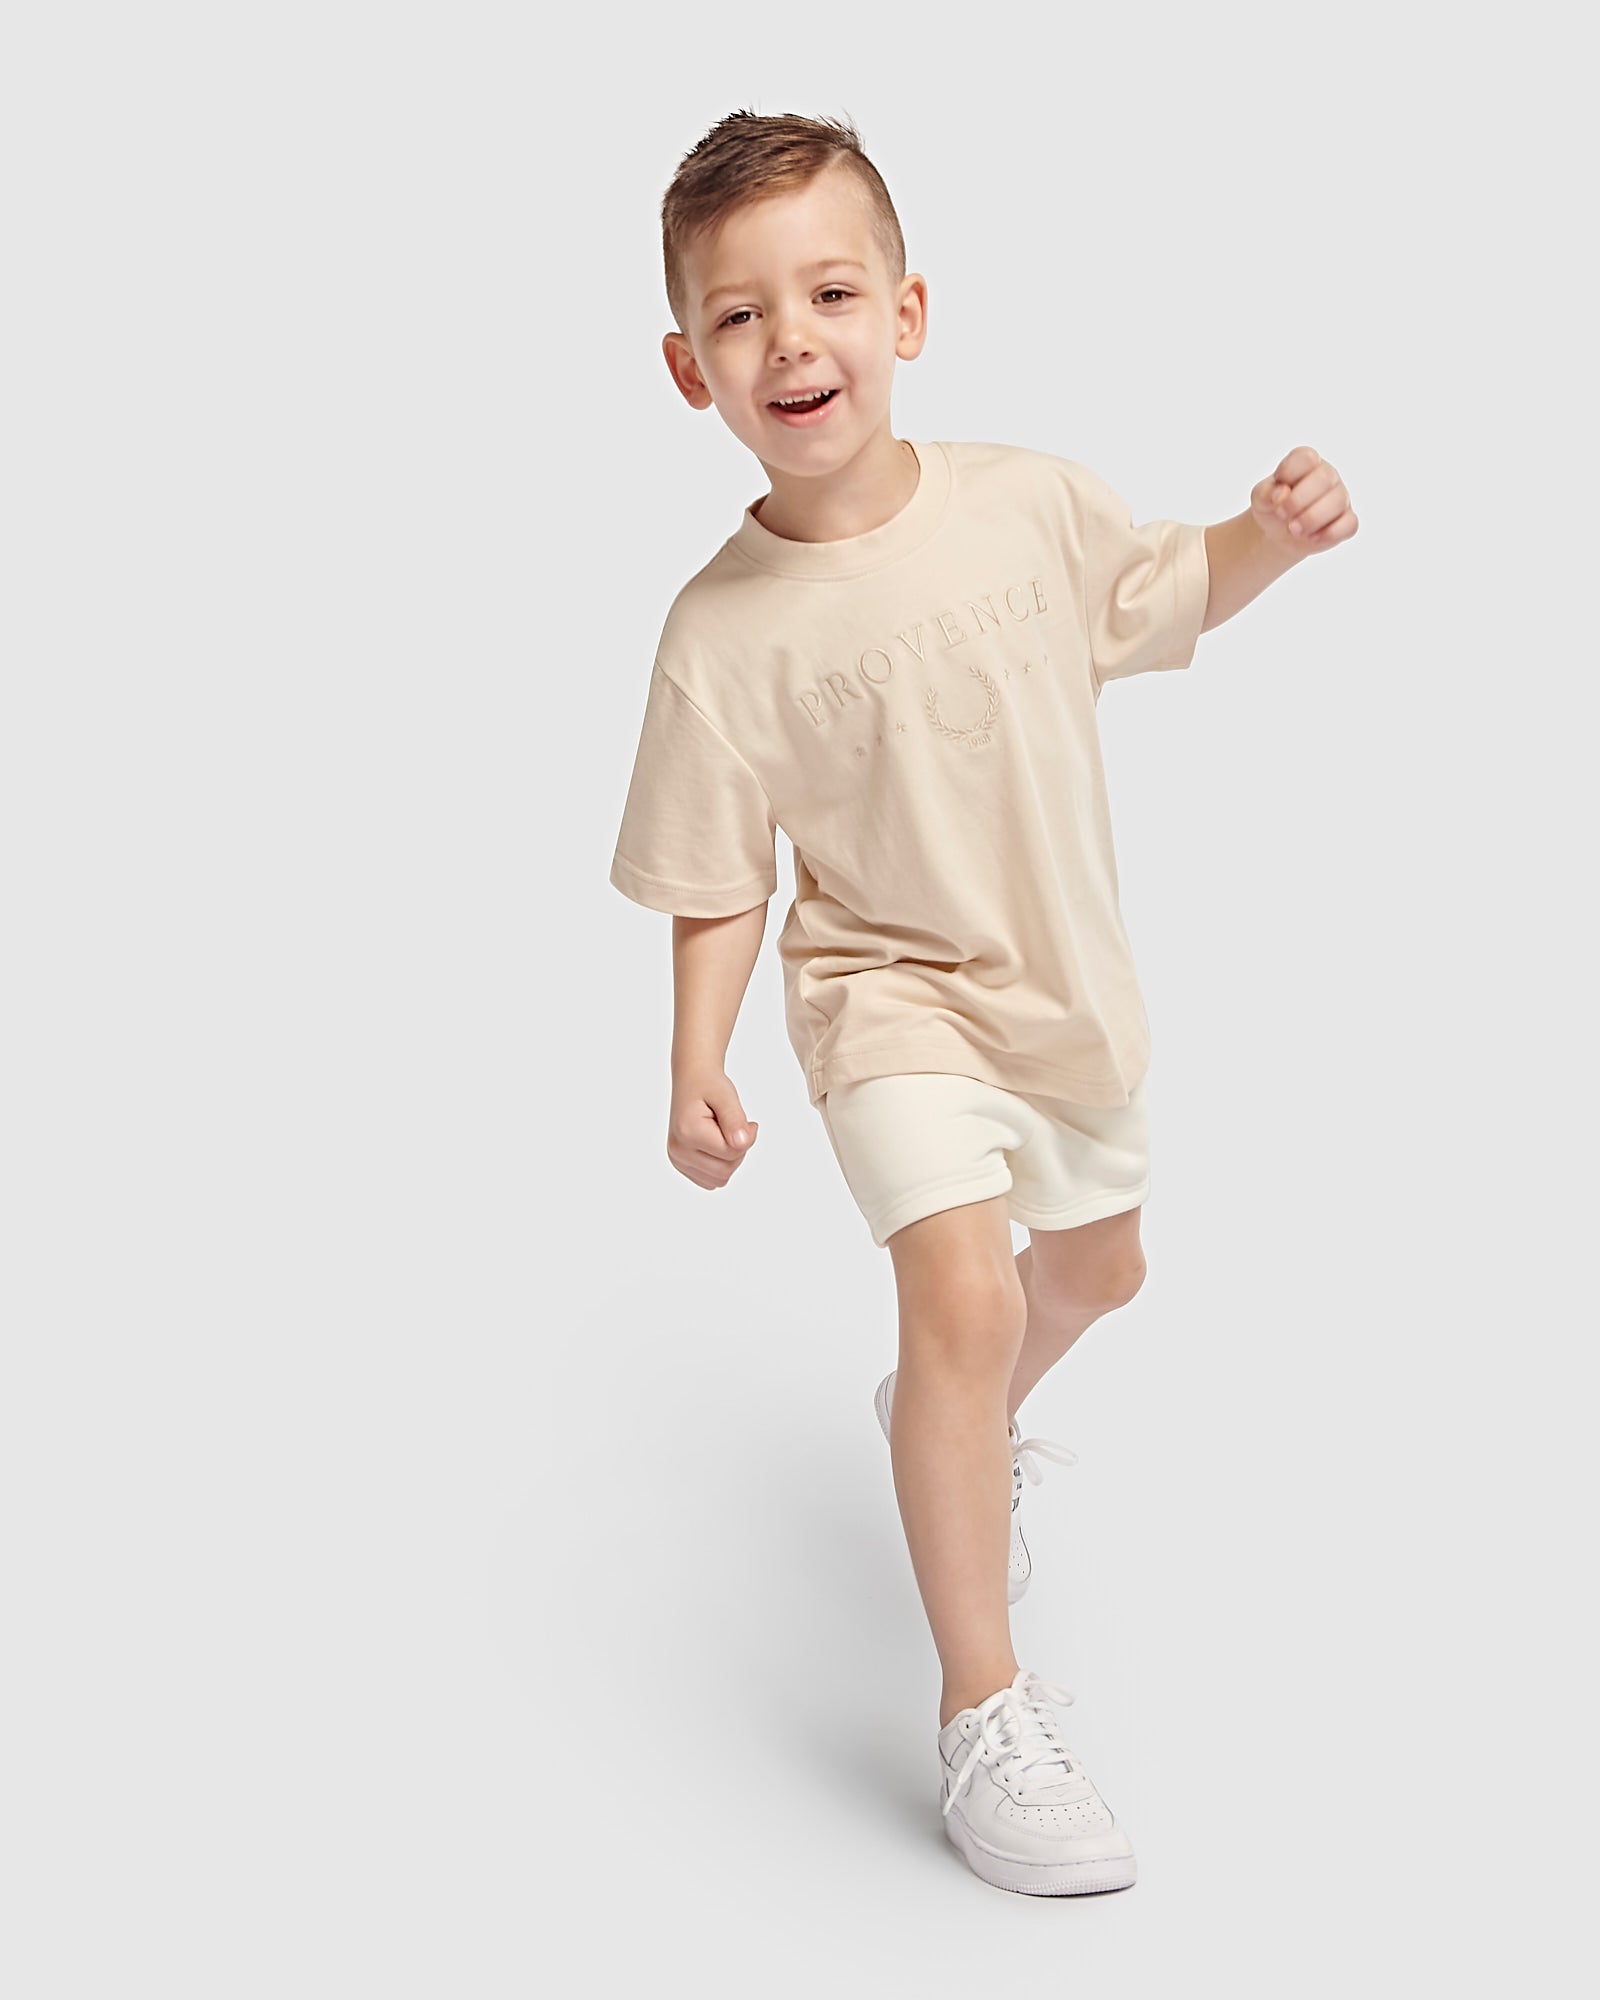 Kids Embroidery T-Shirt